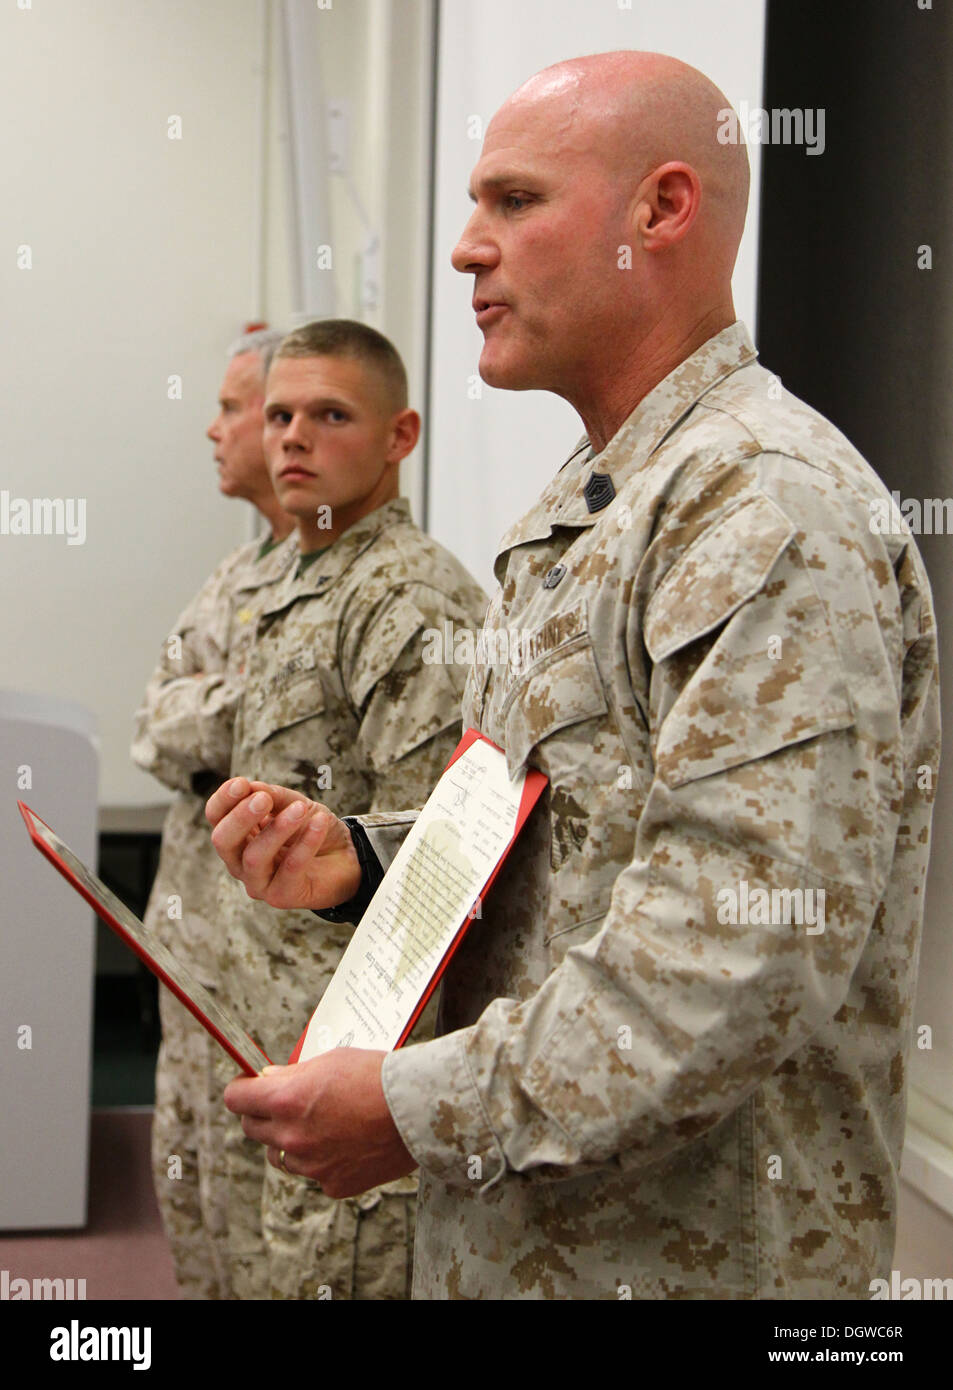 The 35th commandant of the Marine Corps, General James F. Amos, and the 17th sergeant major of the Marine Corps, Sgt. Maj. Micheal P. Barrett, promote Lance Cpl. Wesleigh M. Beckman, ordnance technician with Marine Aviation Logistics Squadron 11 (MALS-11) Stock Photo